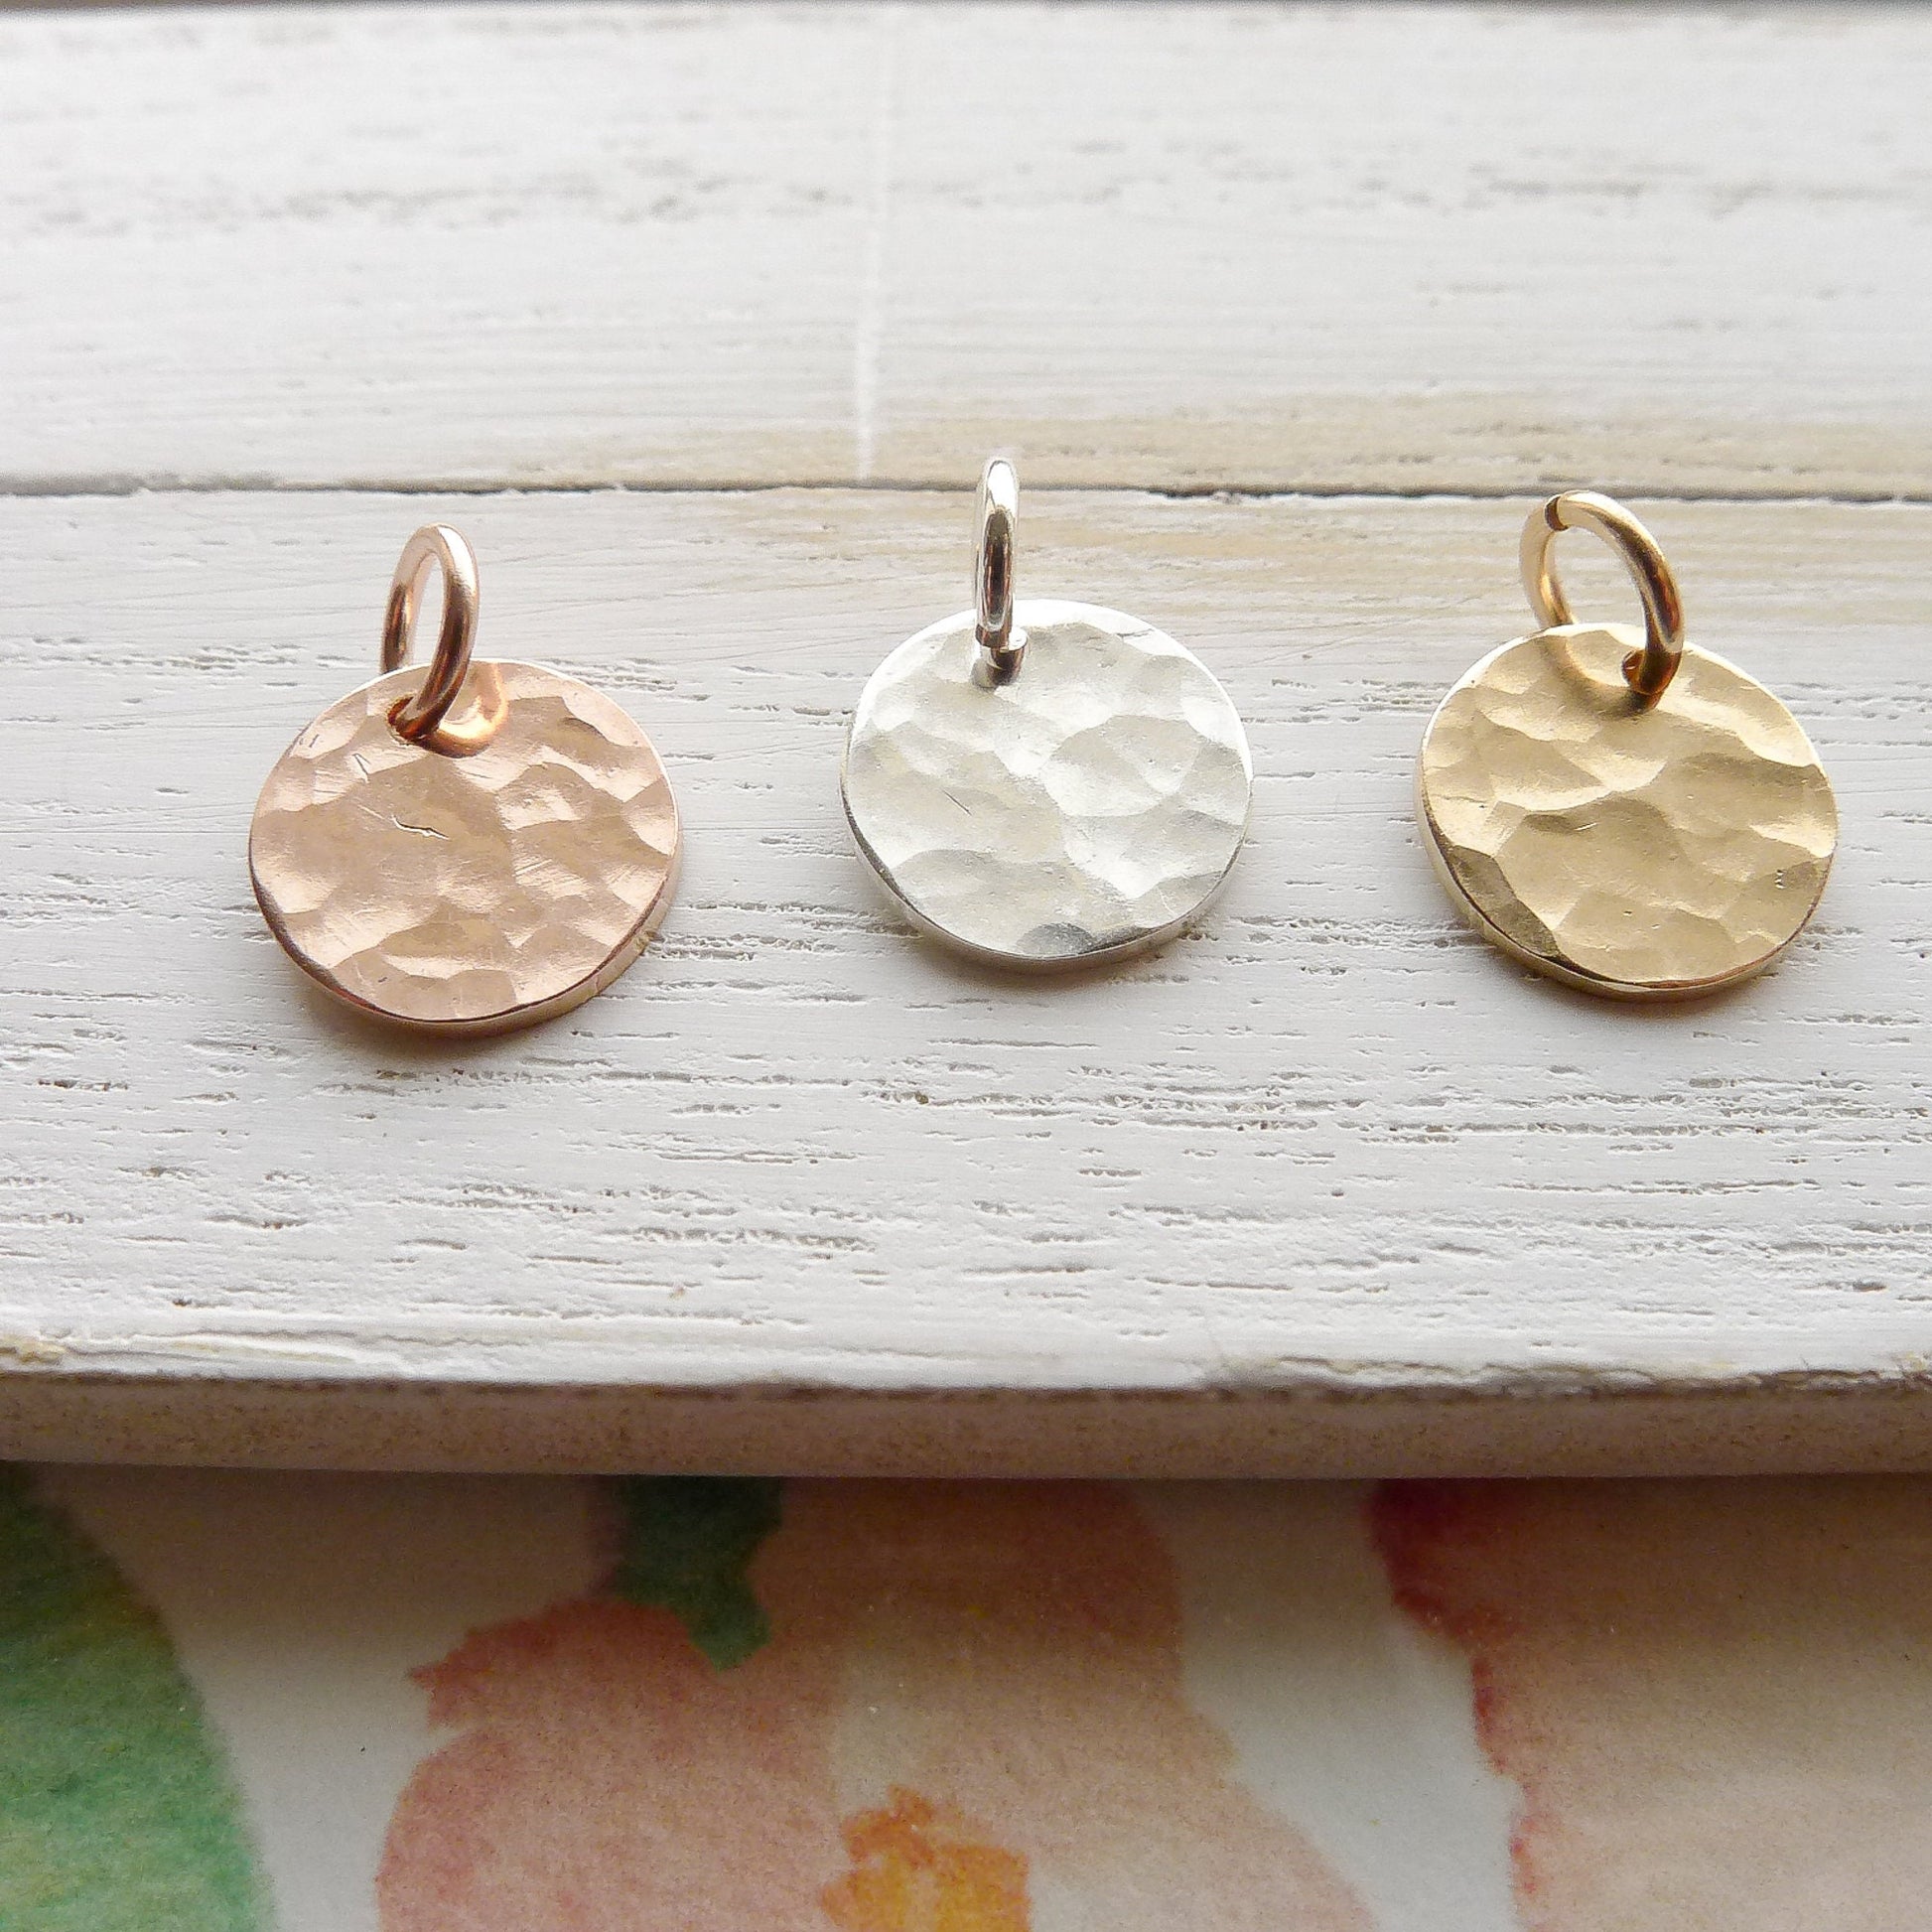 Hammered Disc Charms Pounded Metal Circle Pendants Sterling Rose Gold Filled Jewelry Component For Earrings or Necklaces